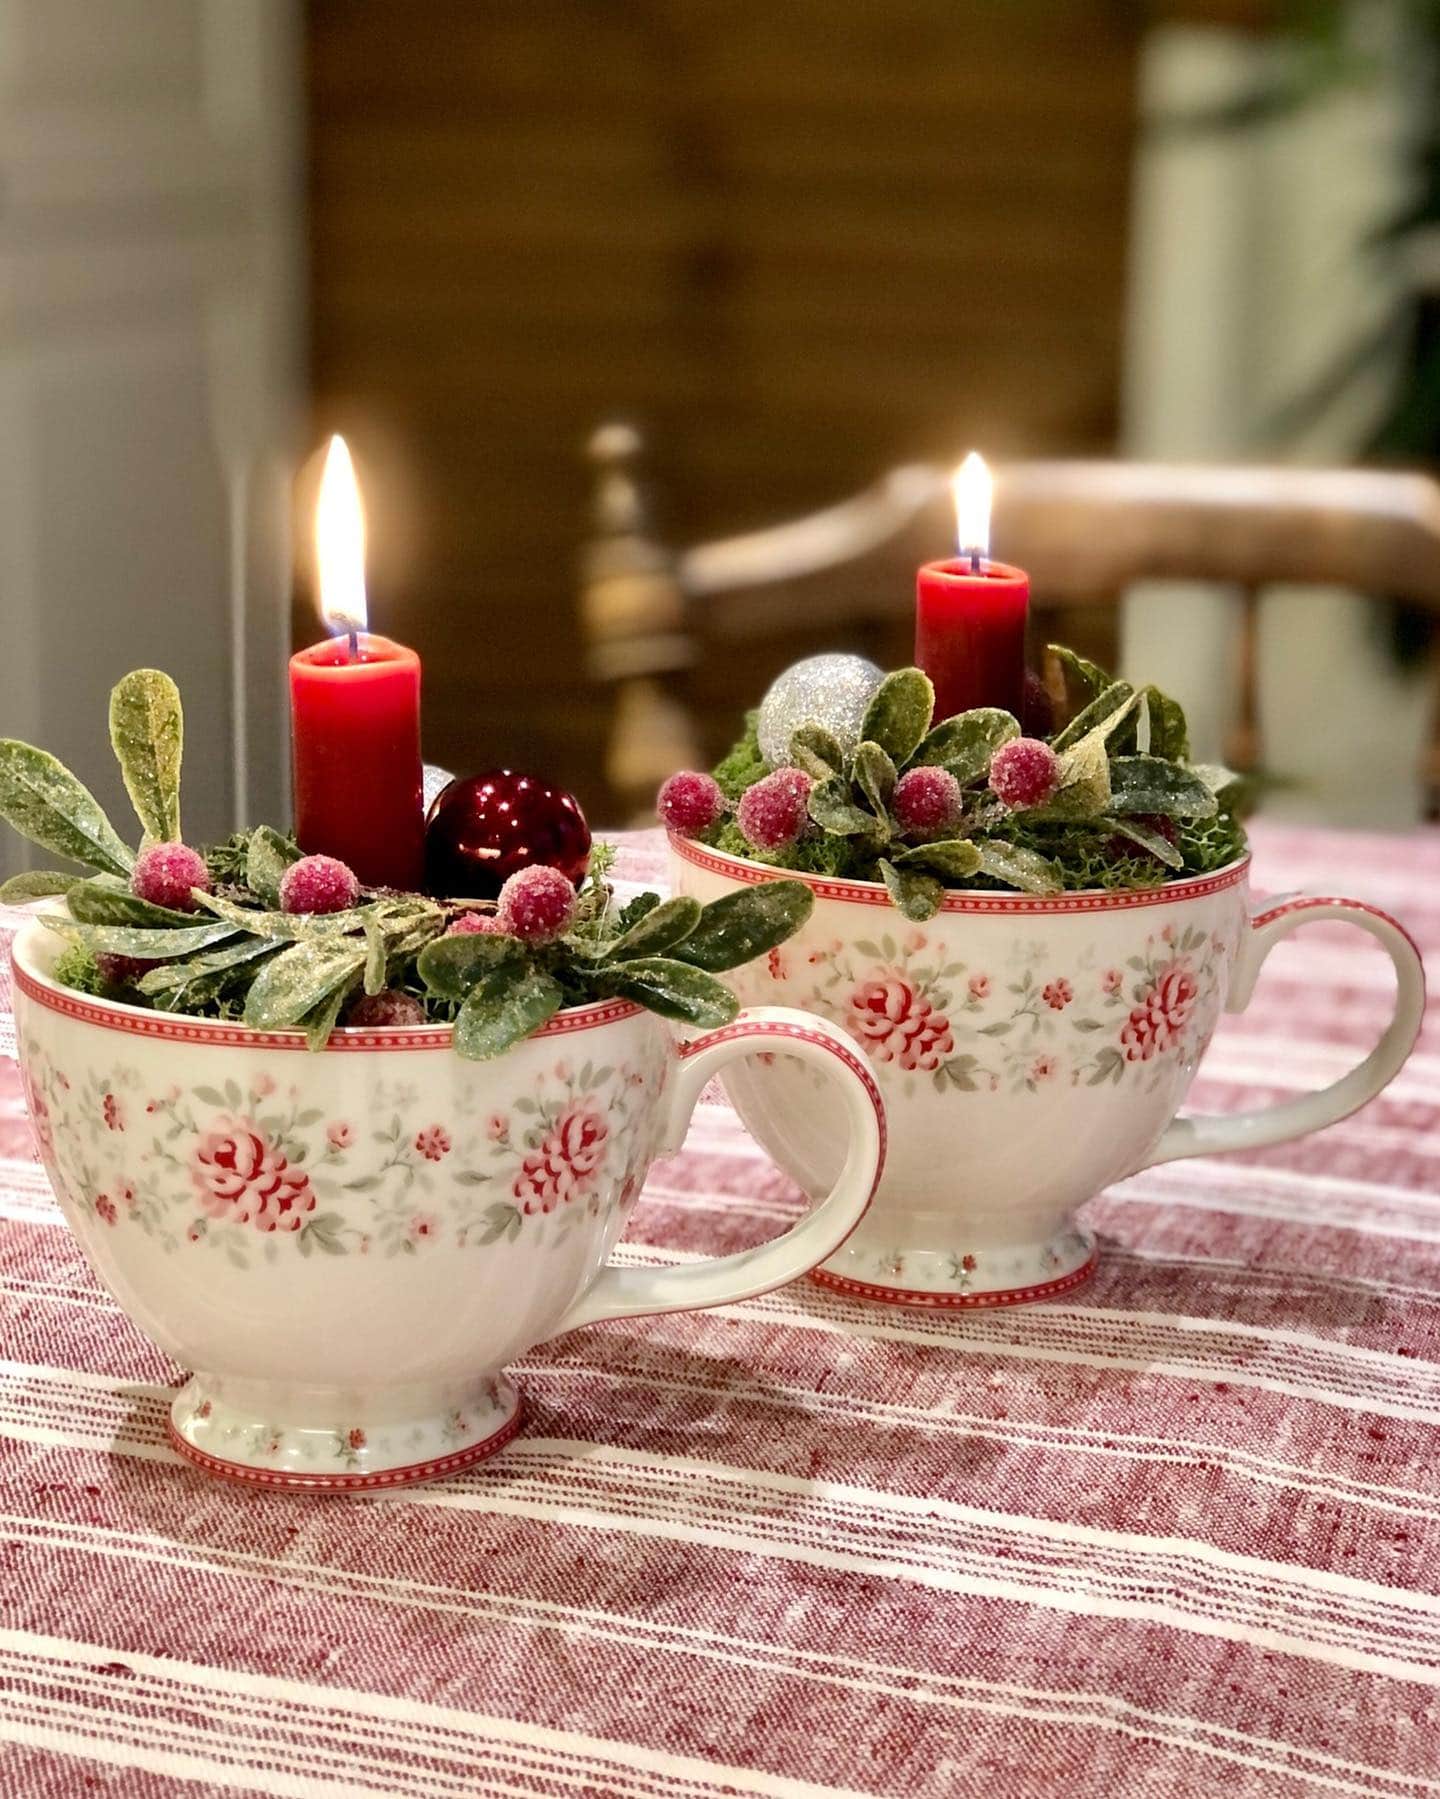 Centerpiece idea featuring tea cups with red candles